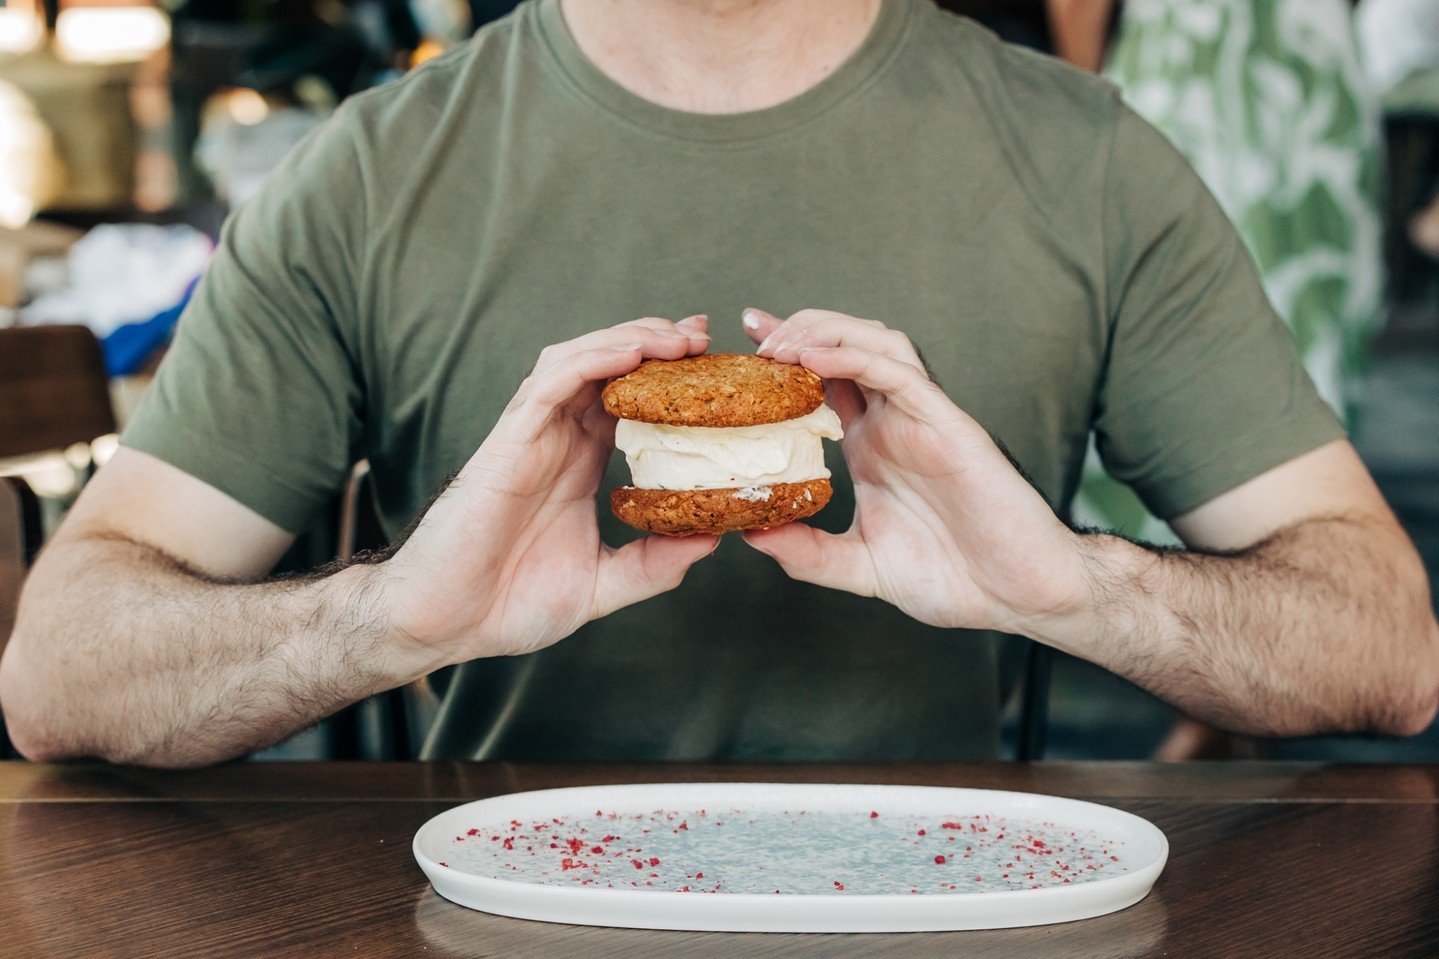 Honour our heroes this Anzac Day with a sweet salute, available only at Hotel Gosford this Thursday from 11:30am!

Our Anzac ice-cream sandwich is crafted from a generations-old recipe paired with the finest locally sourced ice creams. Toast to our d